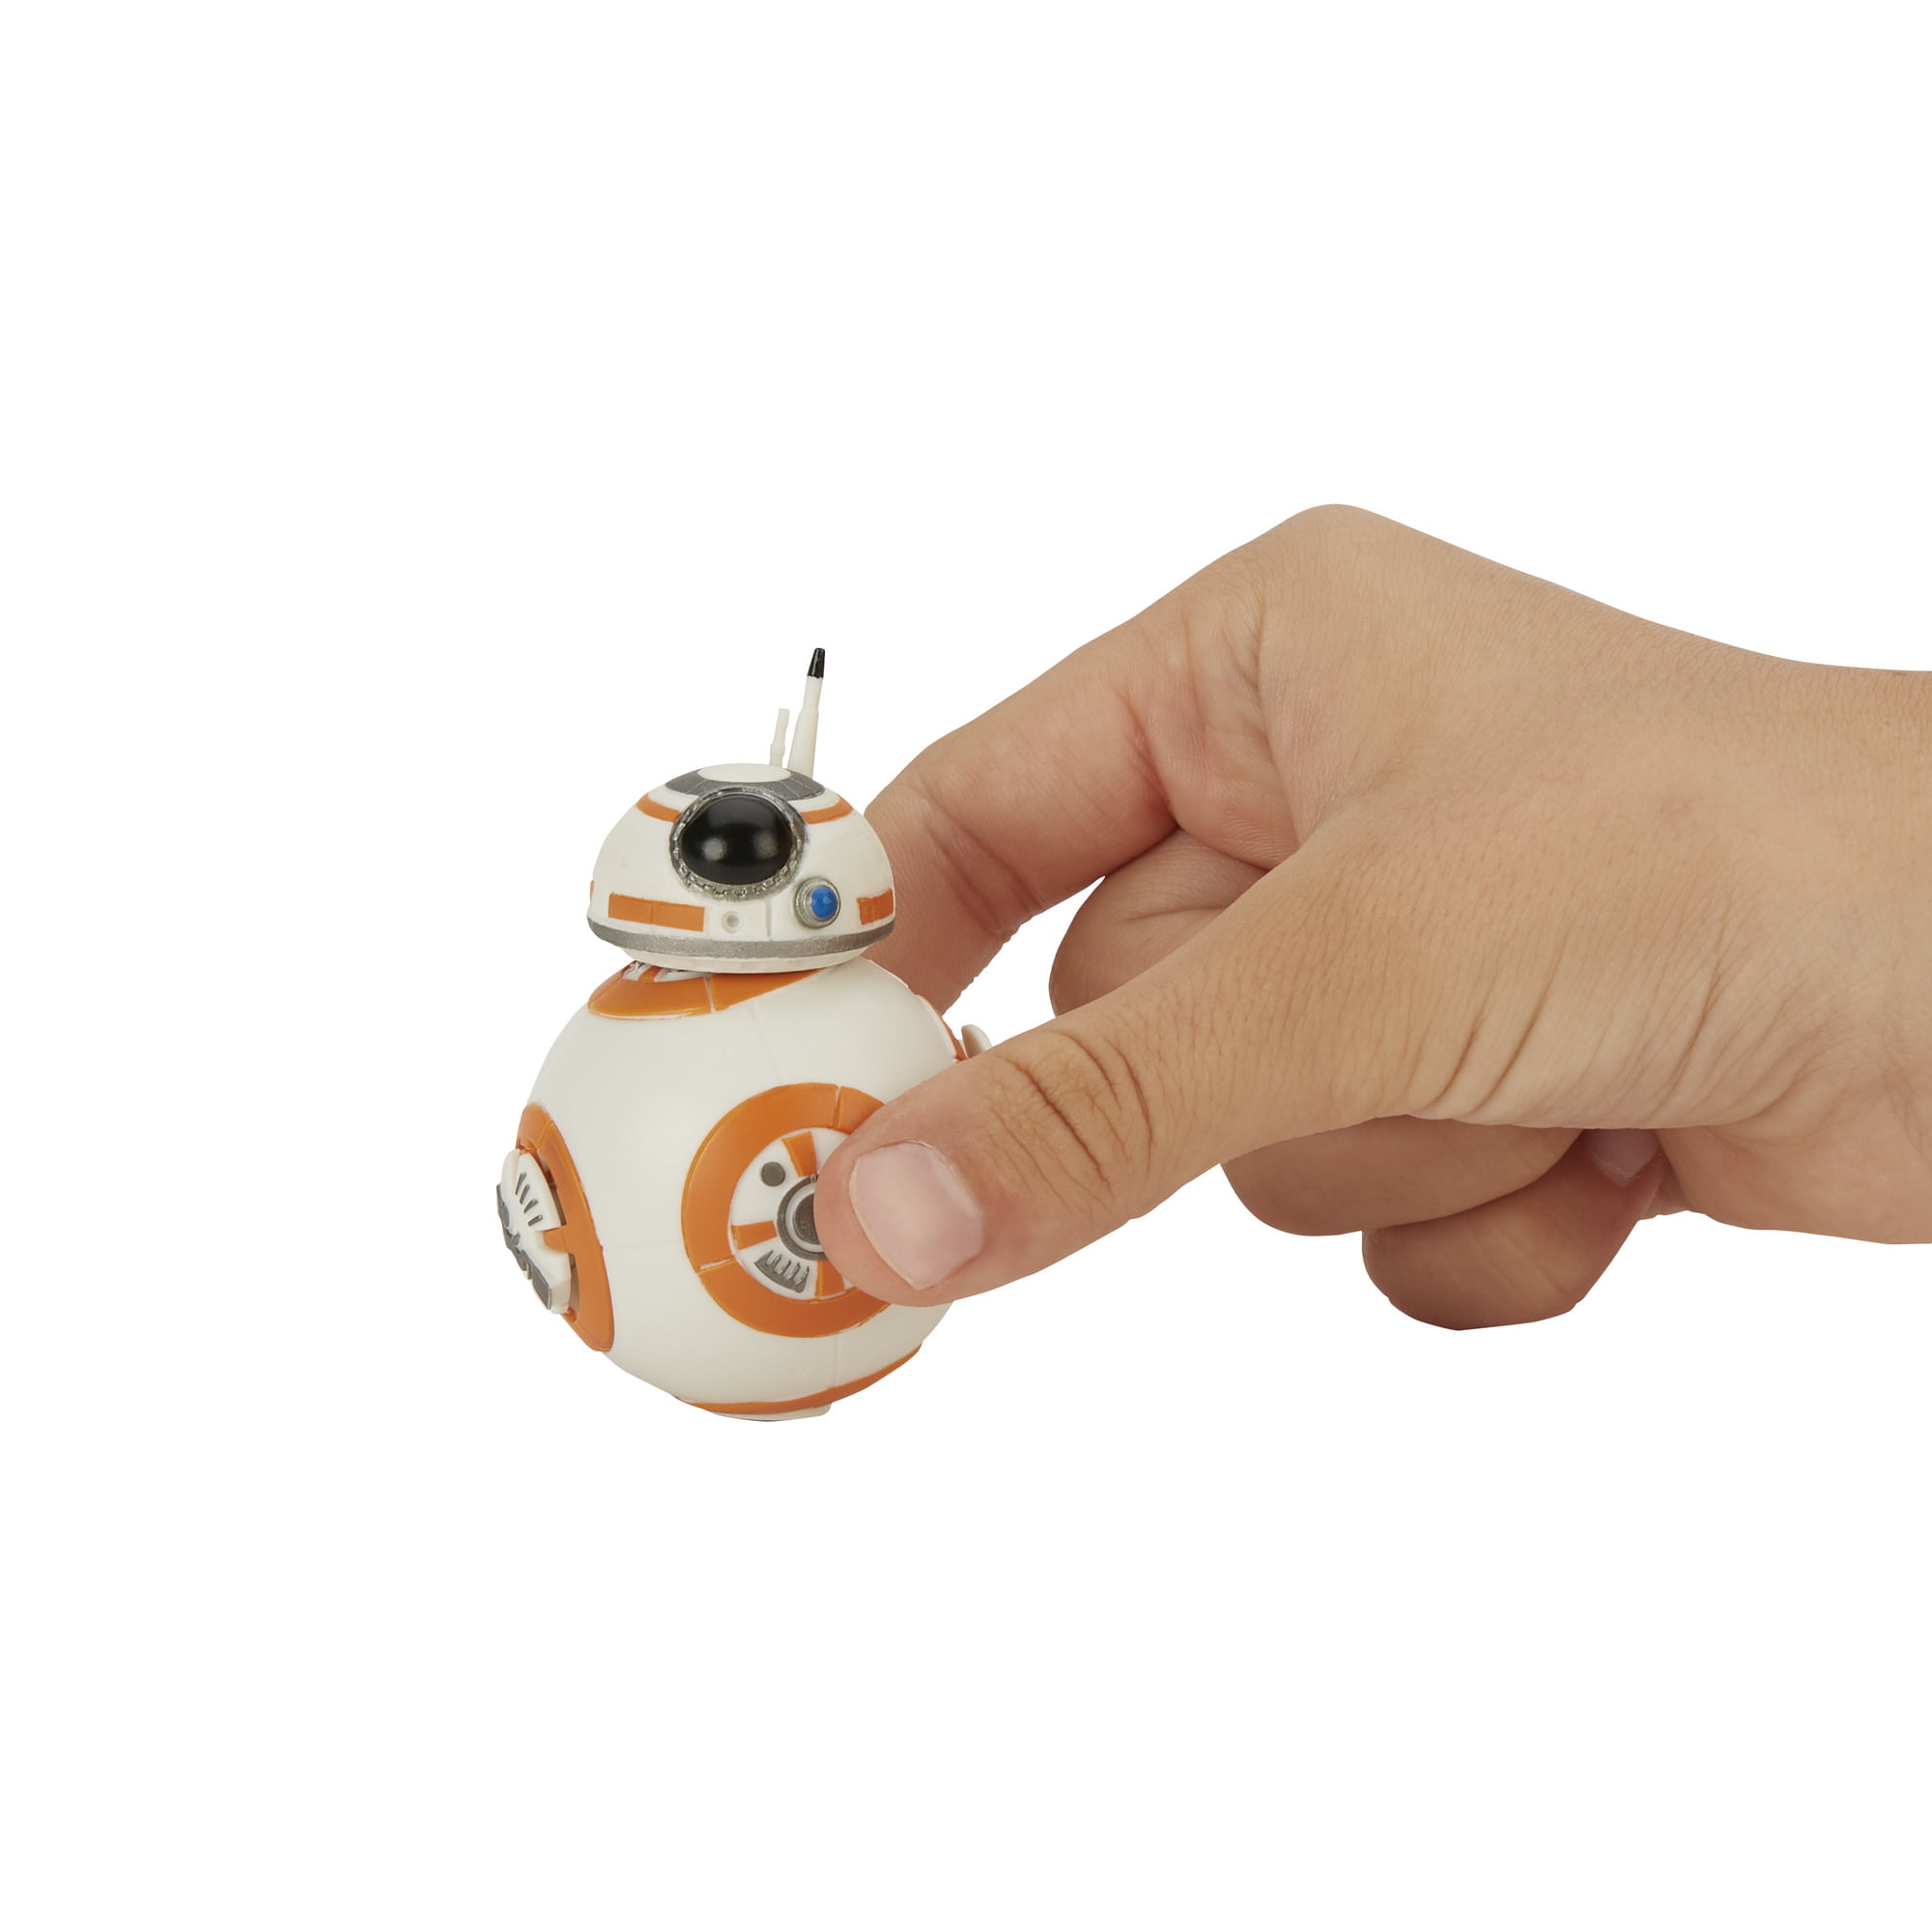 Hasbro Star Wars: Galaxy of Adventures BB-8 R2-D2 D-O 3-Pack Toy Droid Figures for sale online 